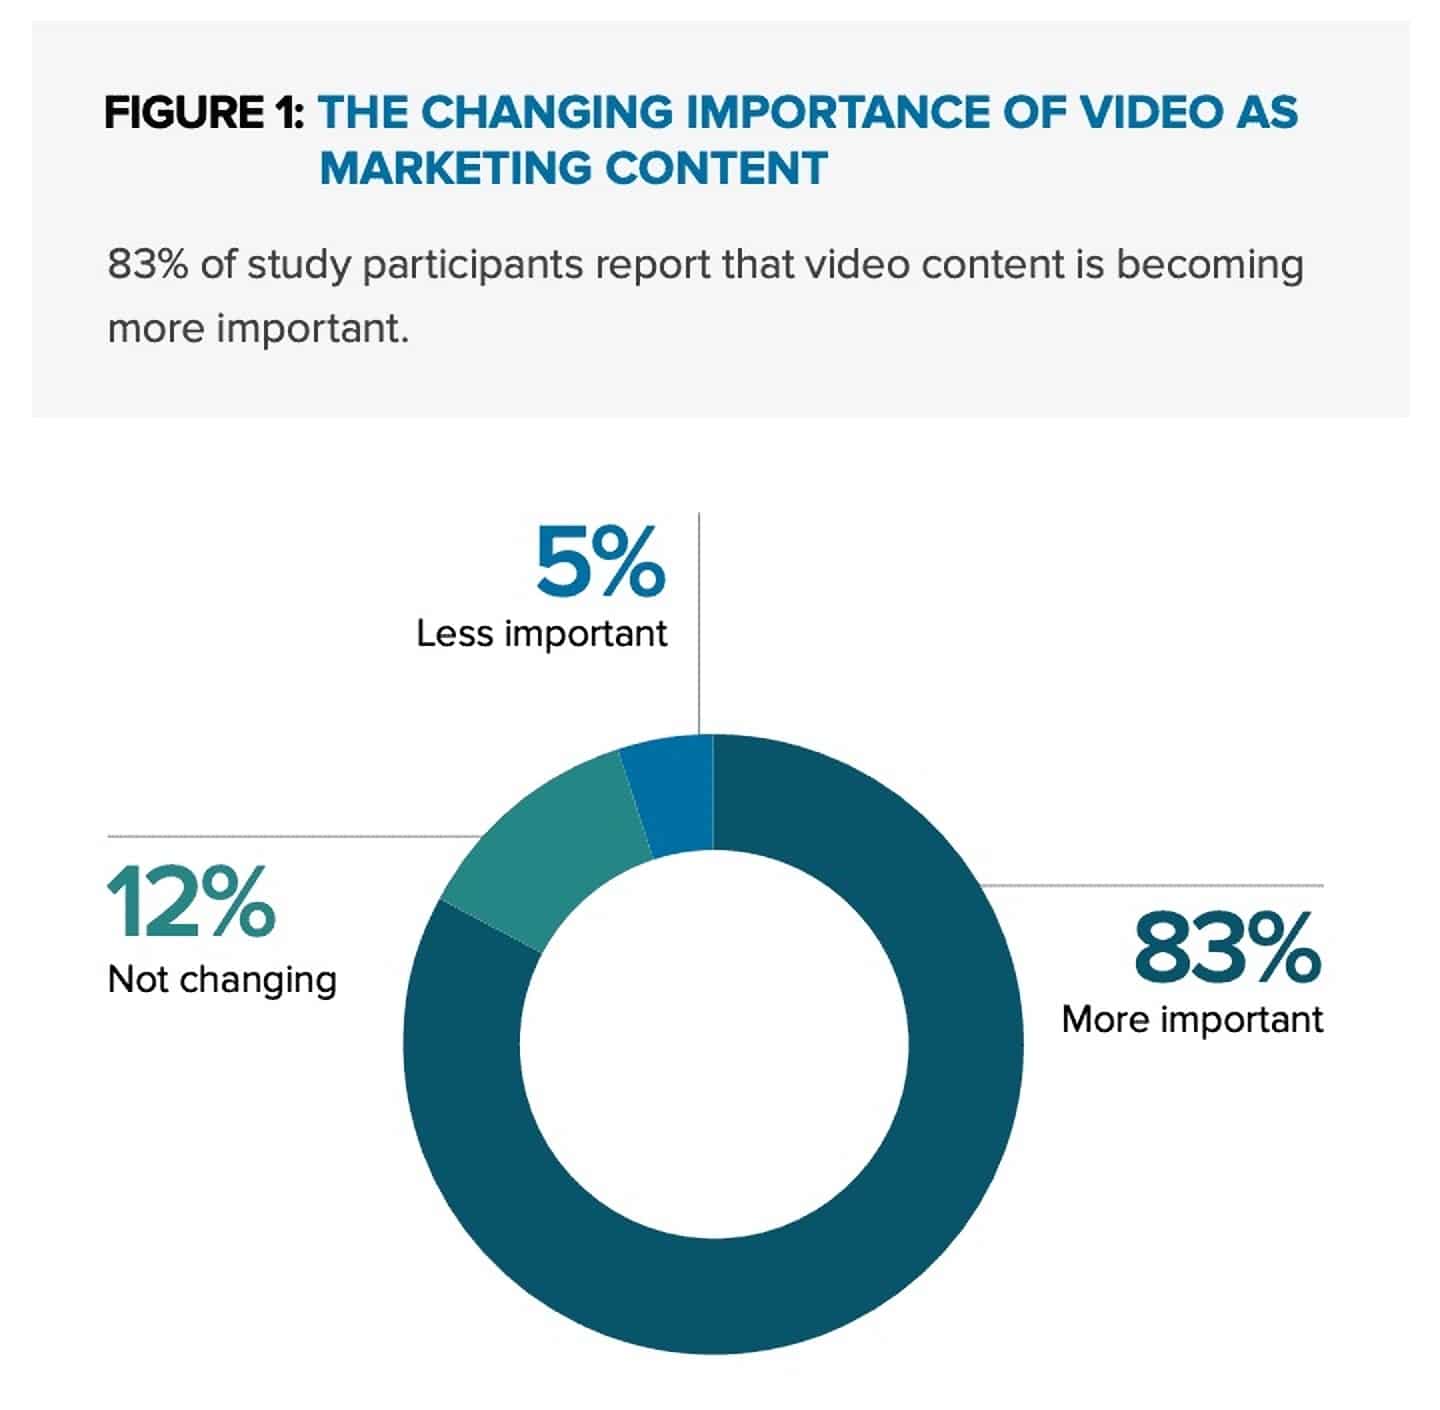 Video content is becoming more important than traditional forms of content